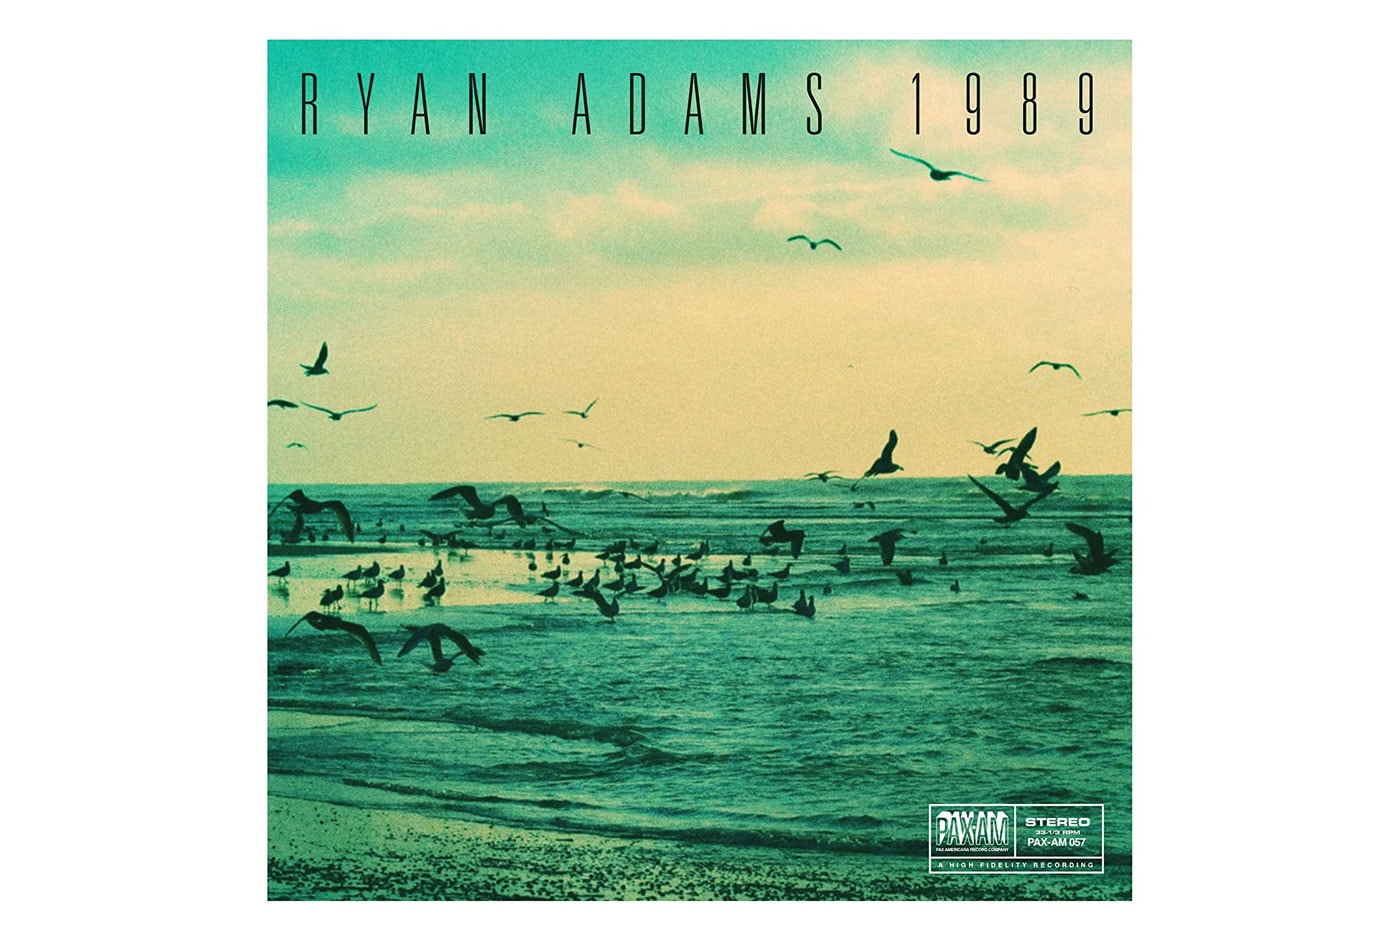 Listen to Ryan Adams' Cover of '1989' Album by Taylor Swift